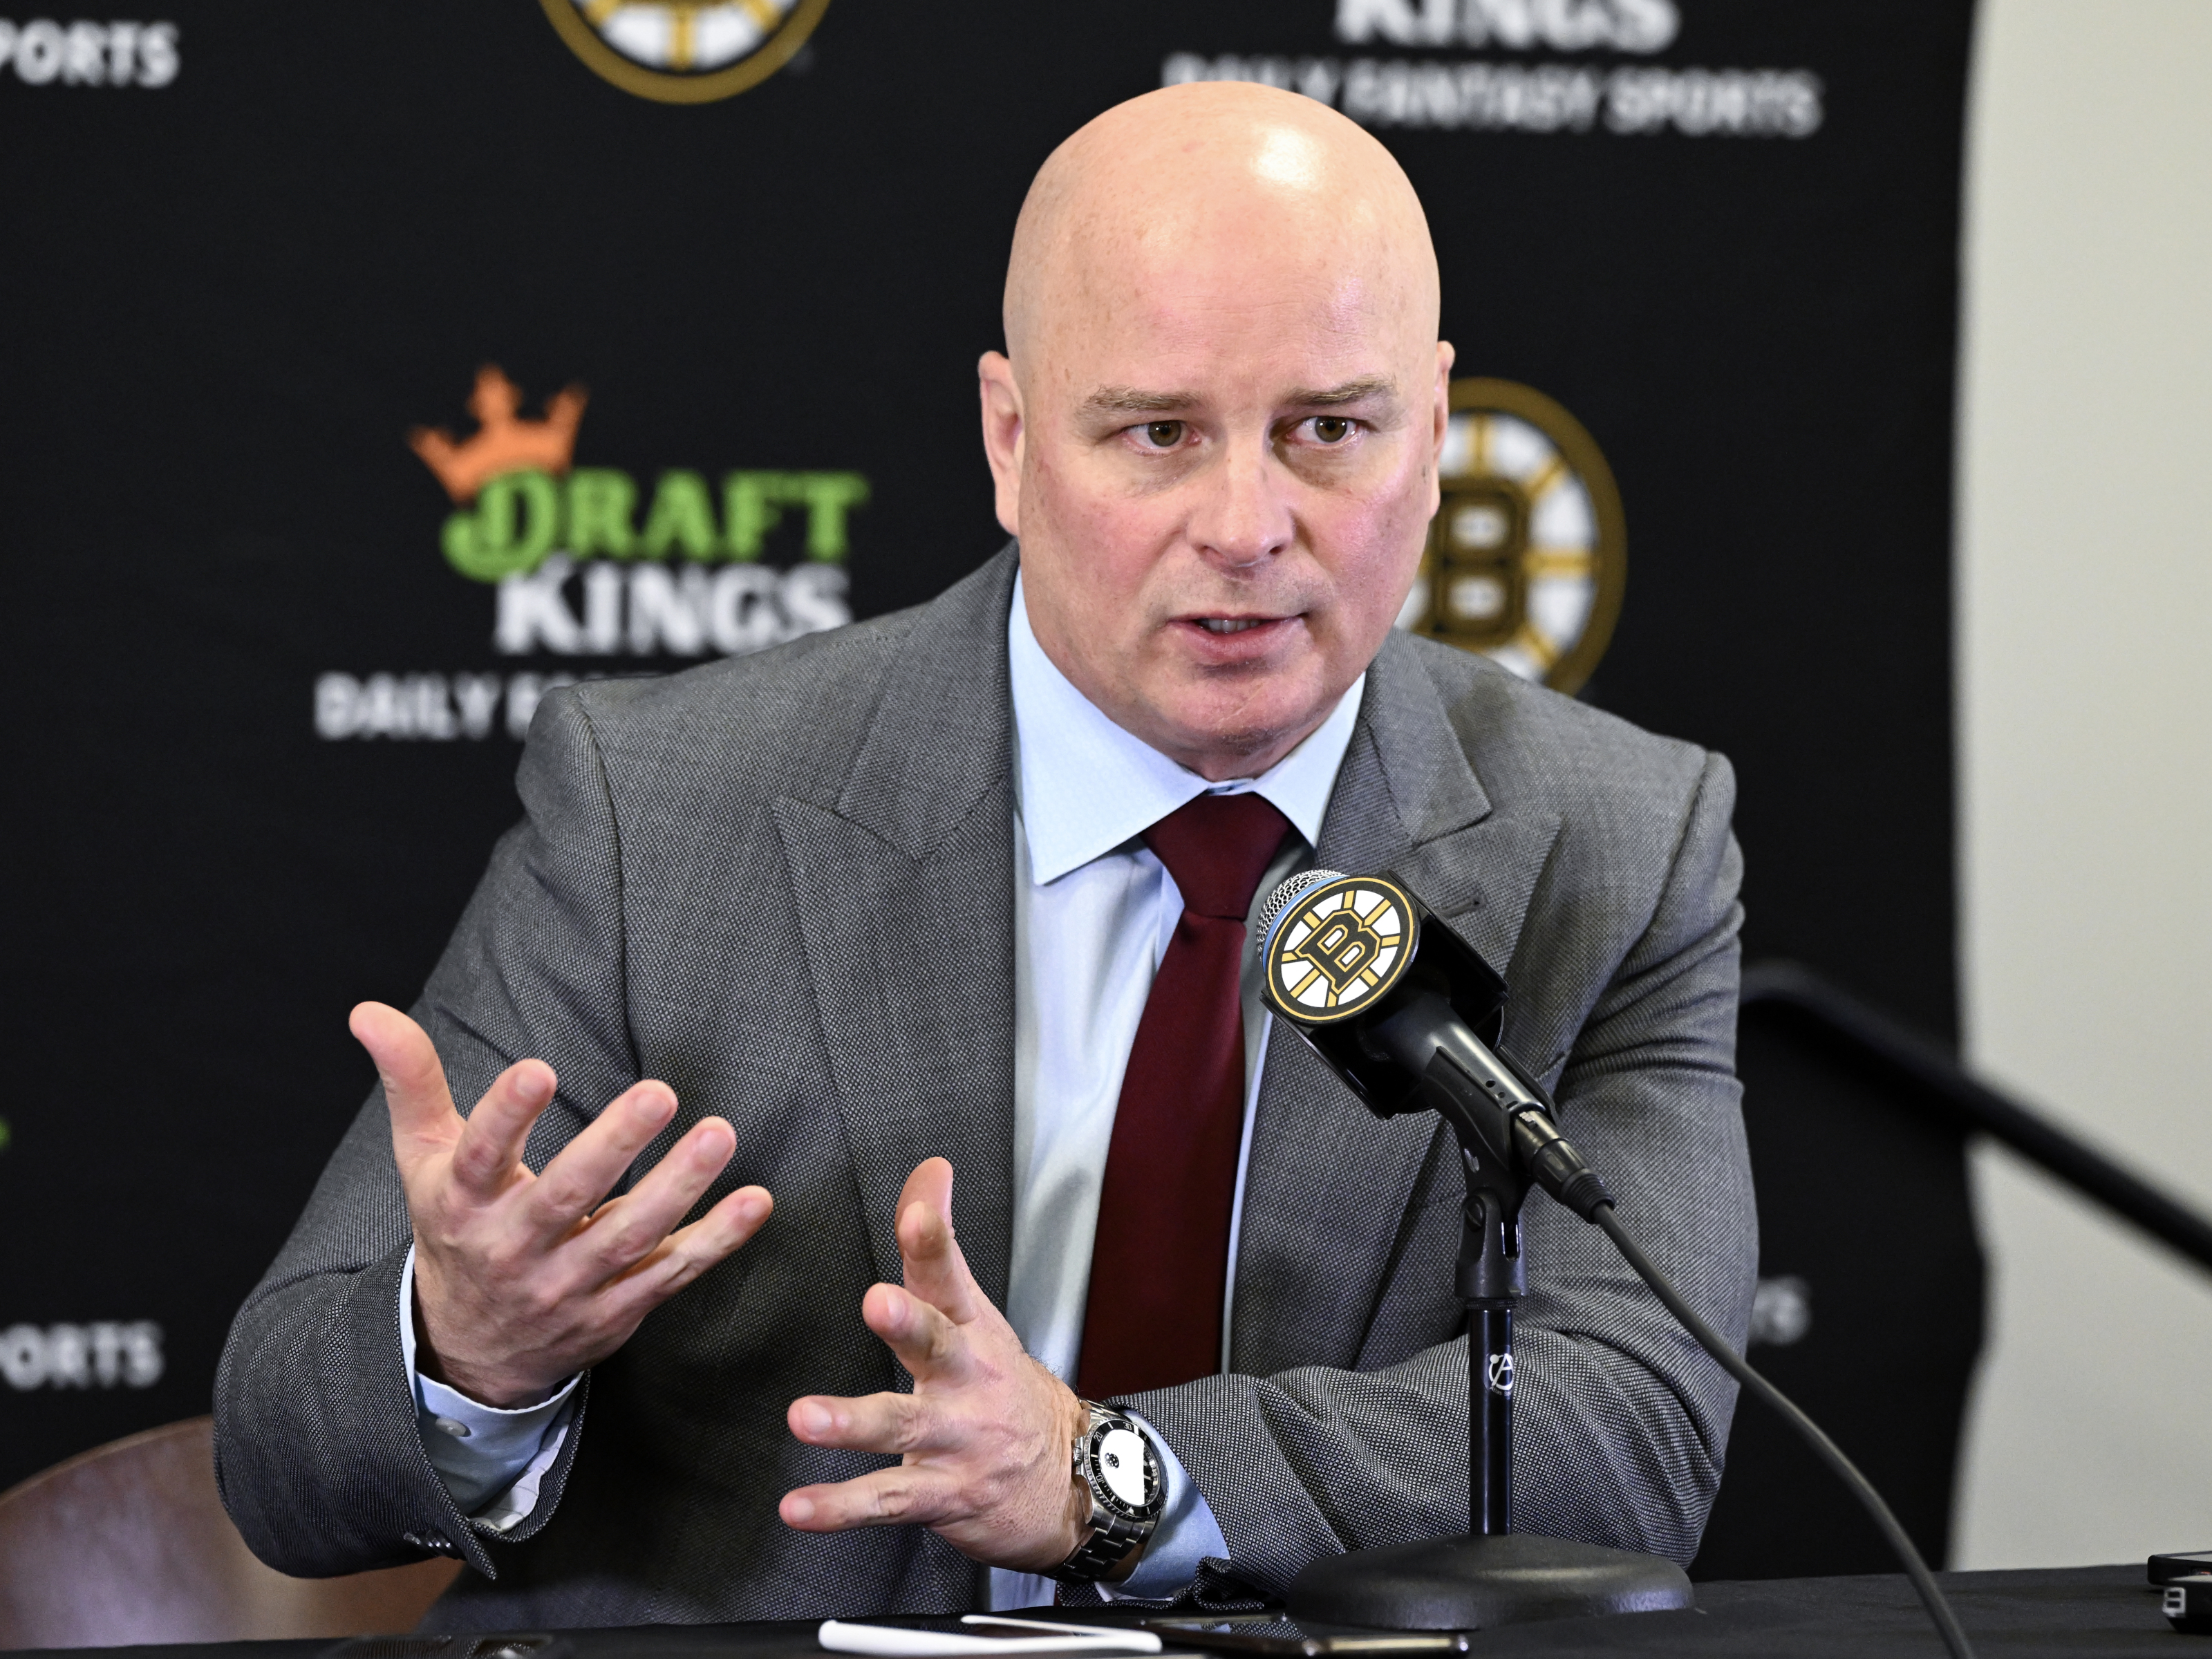 Jim Montgomery leads Bruins to NHL record 63 wins